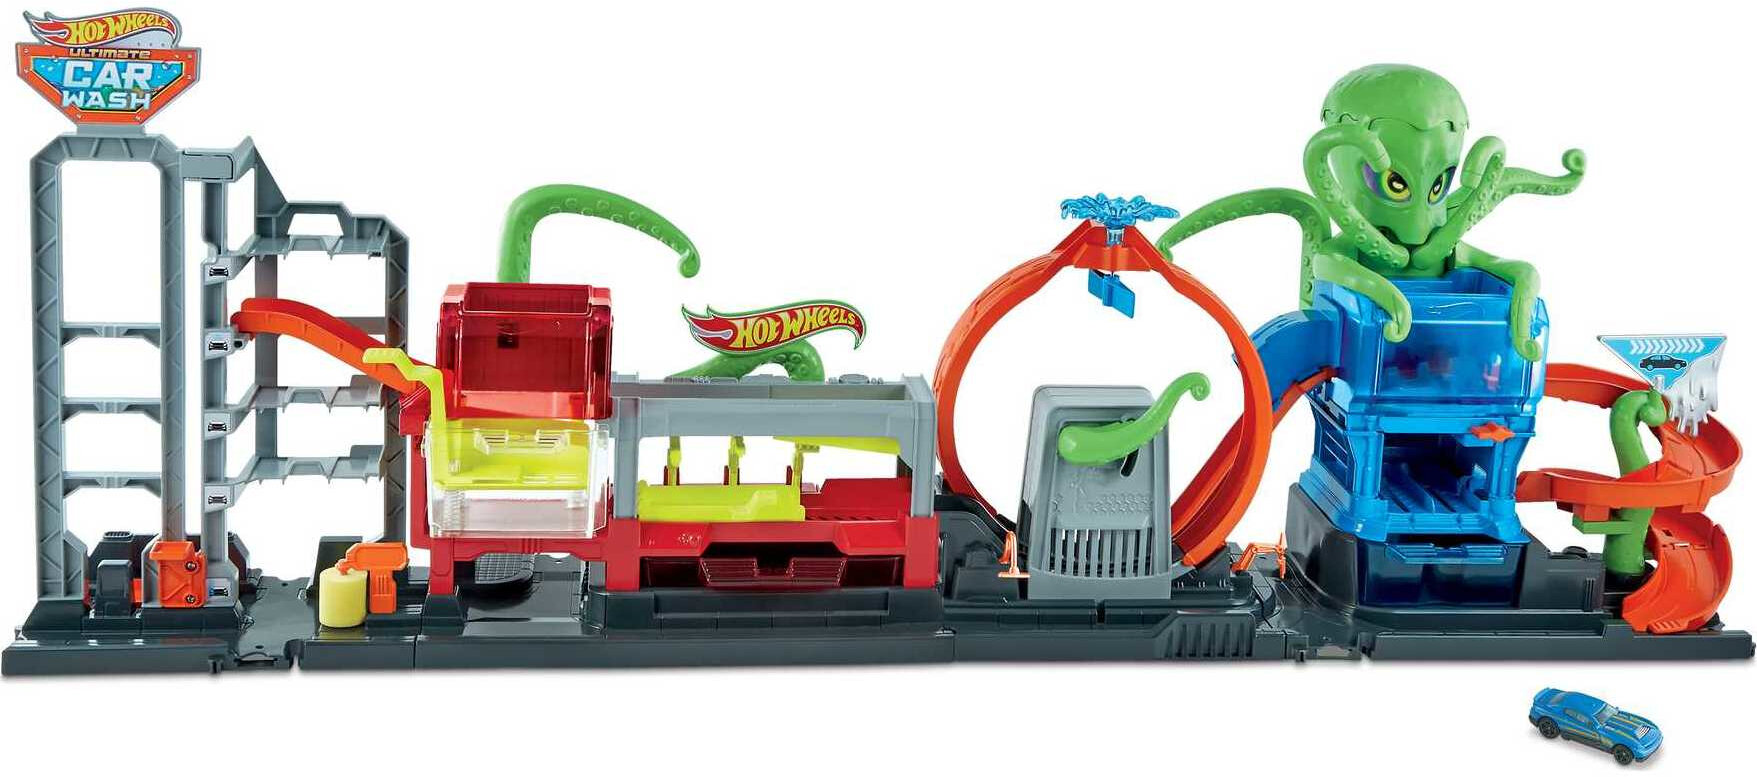 Hot Wheels City Ultimate Octo Car Wash Playset & 1 Color Reveal Toy Car in 1:64 Scale - image 1 of 7